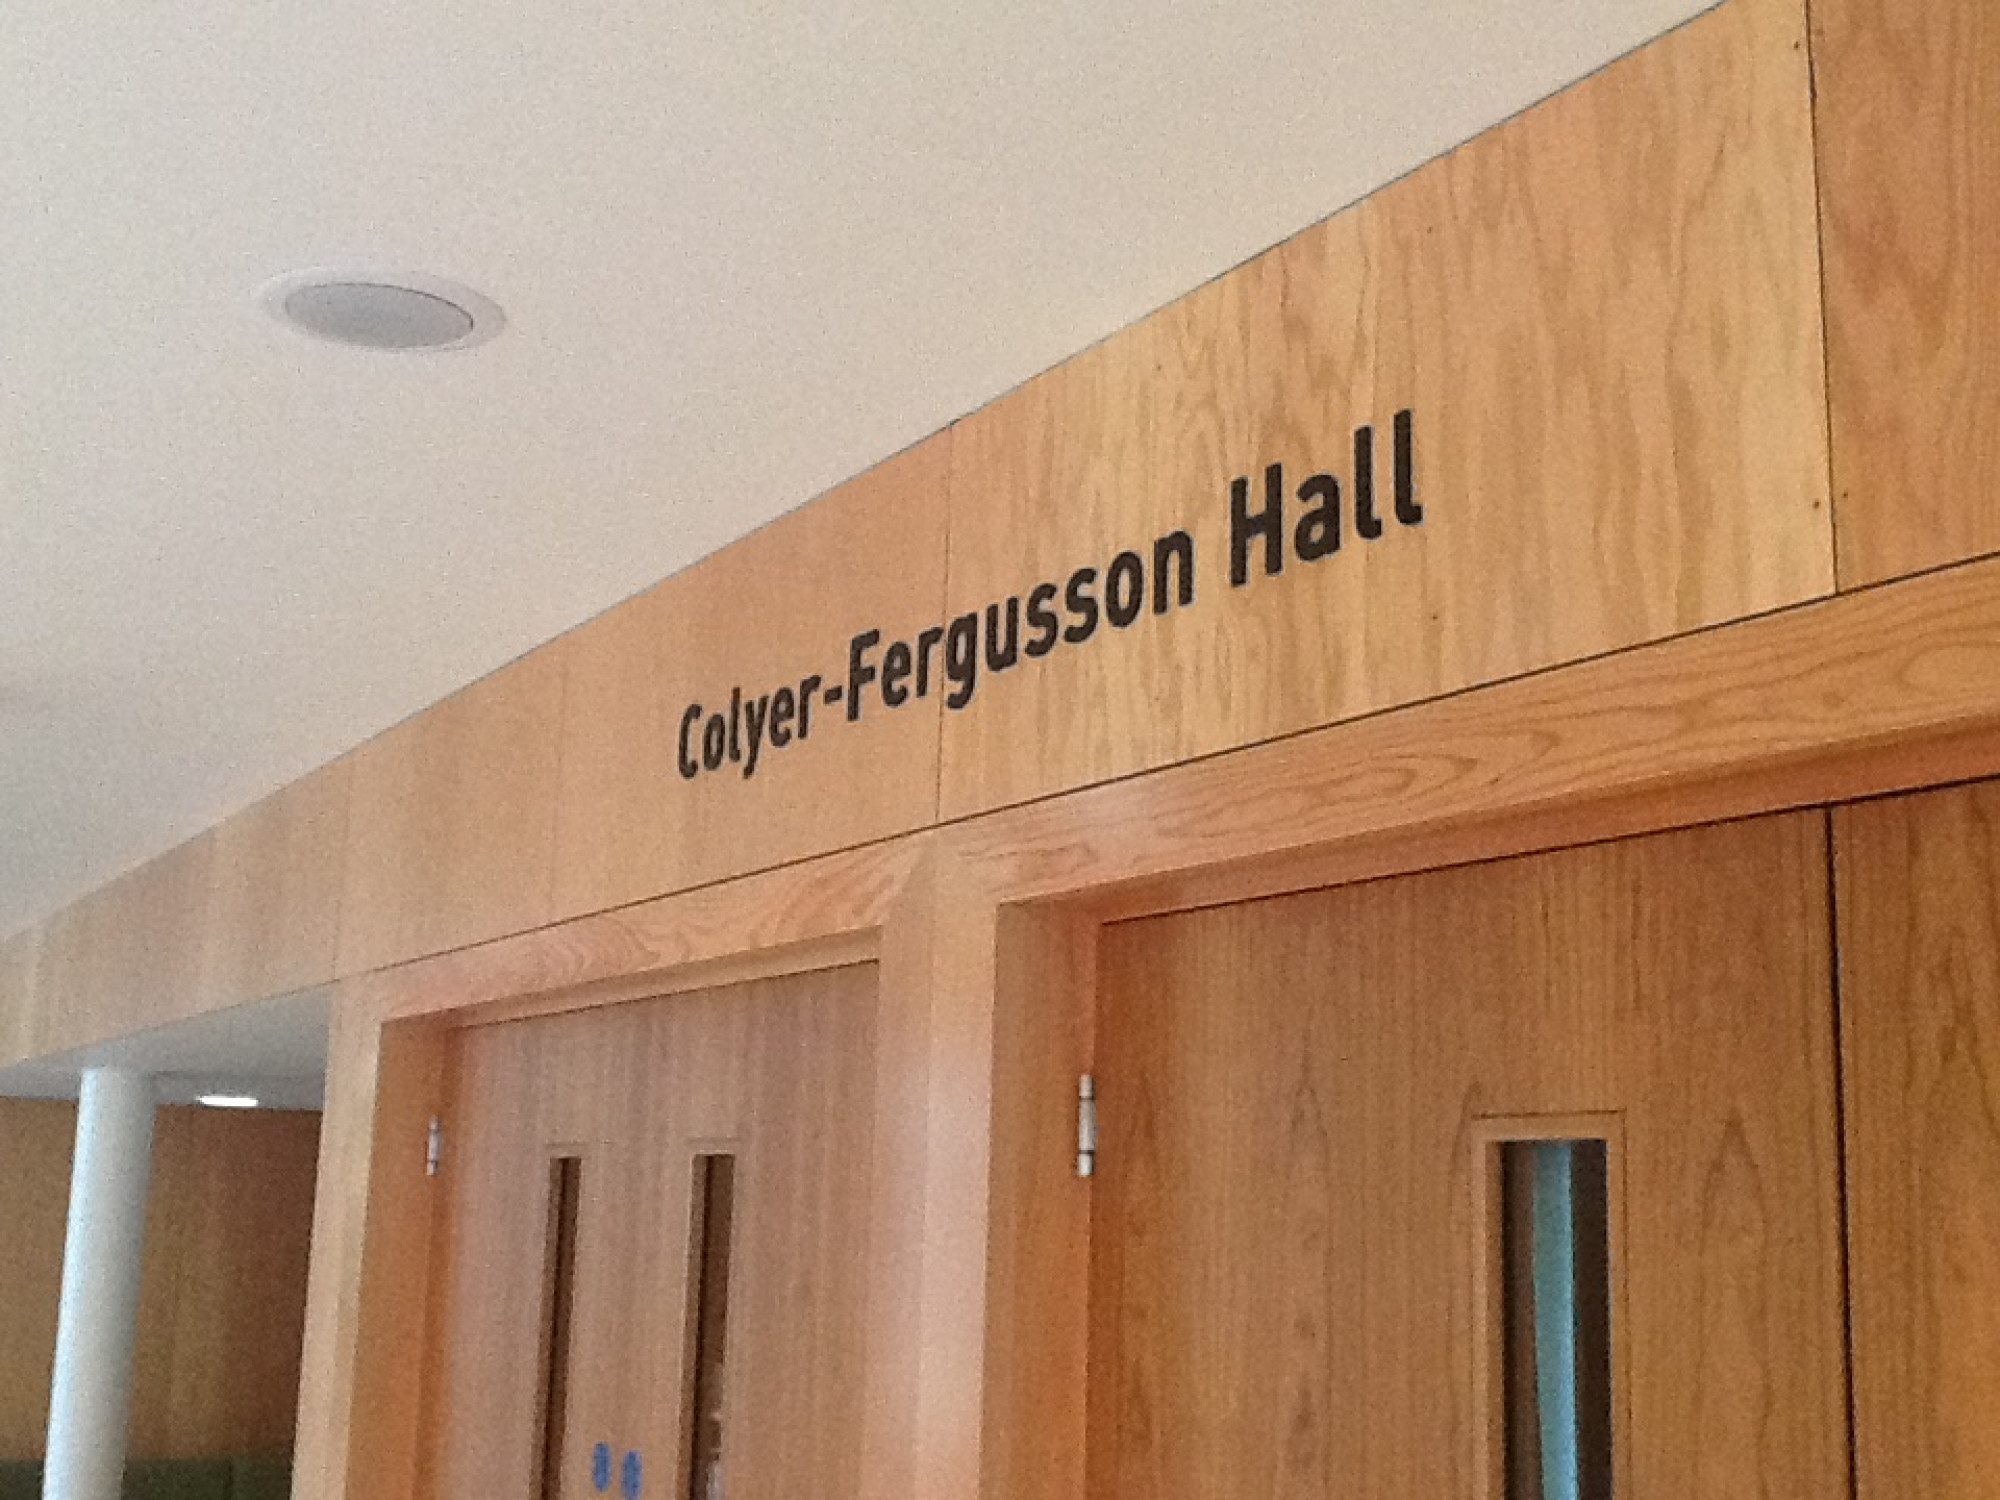 Colyer-Fergusson Hall sign